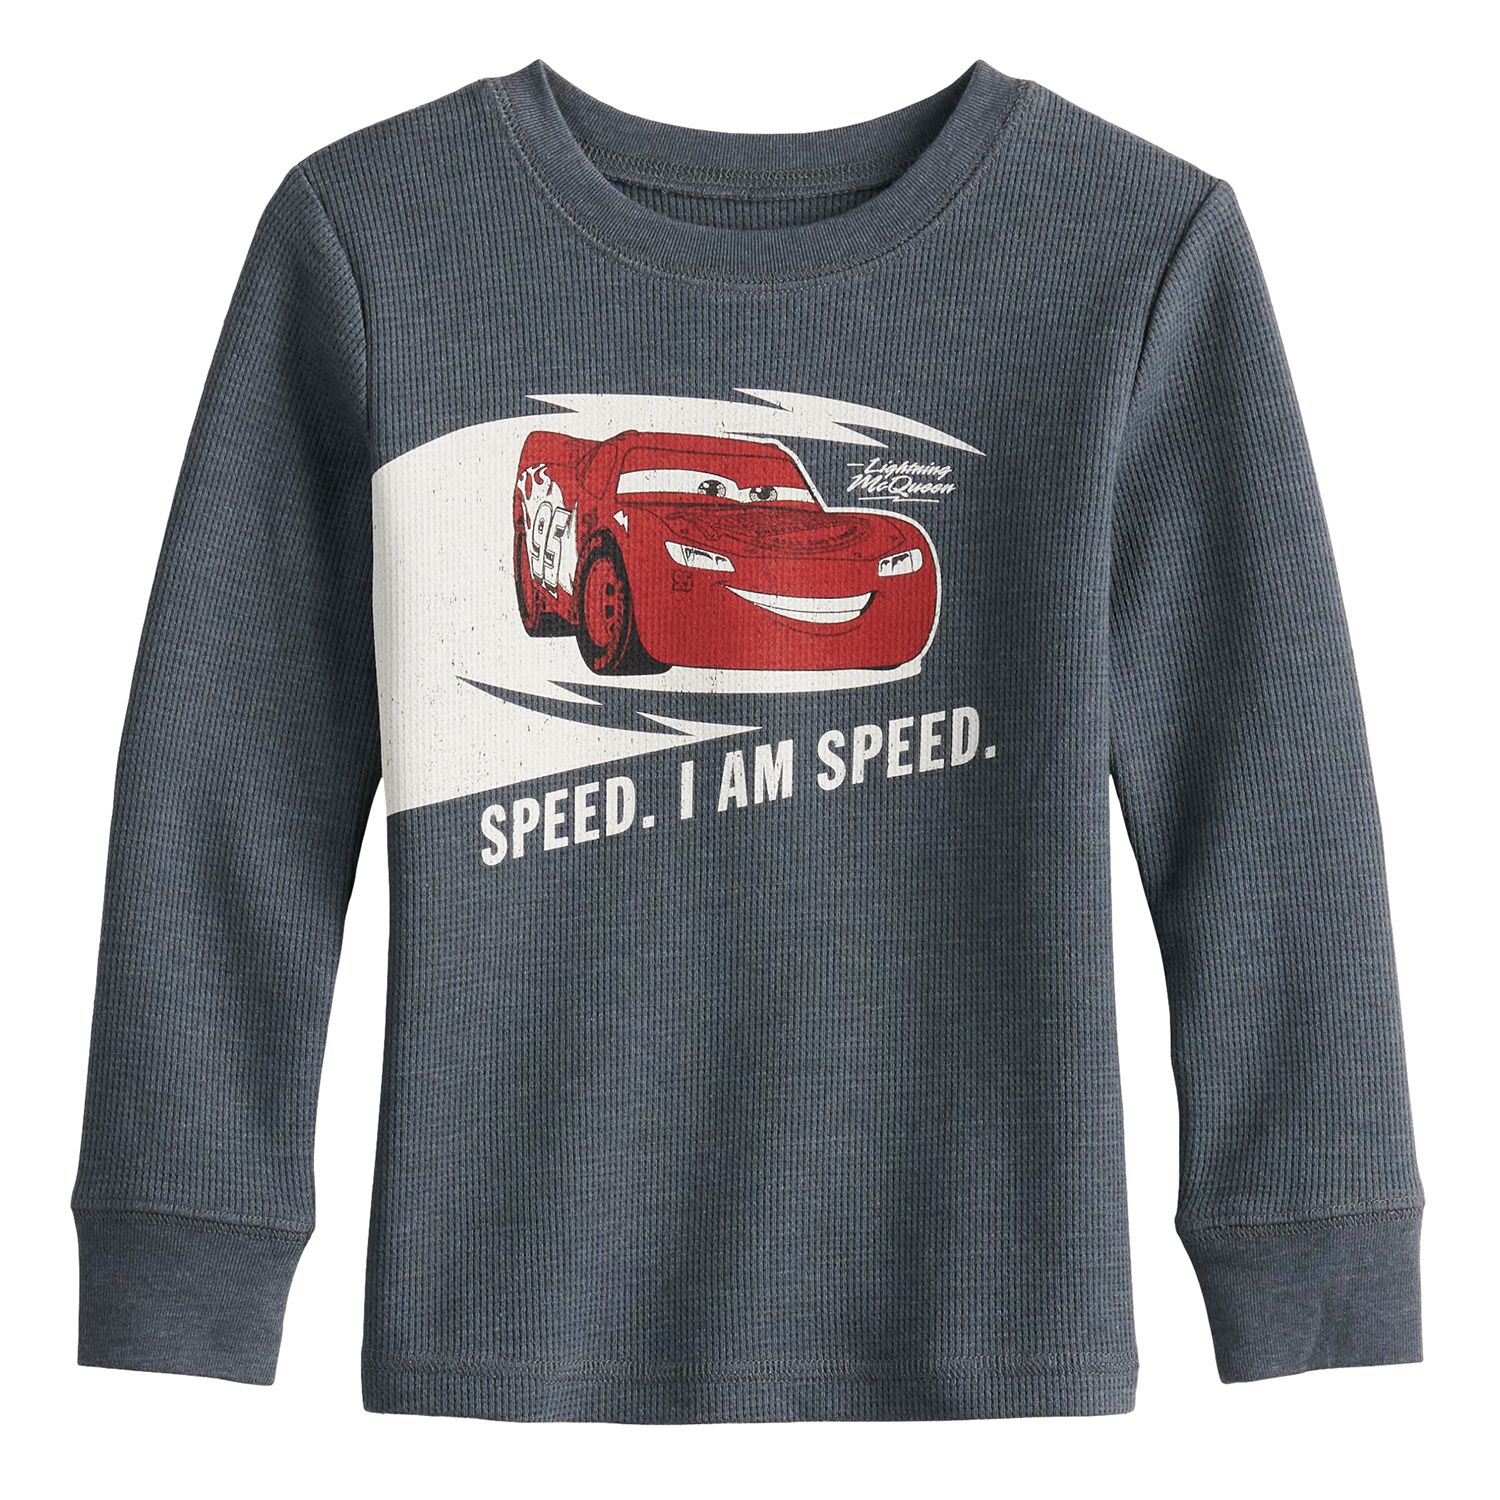 Image for Disney/Jumping Beans Disney / Pixar Cars Toddler Boy Lightning McQueen Thermal Tee by Jumping Beans® at Kohl's.